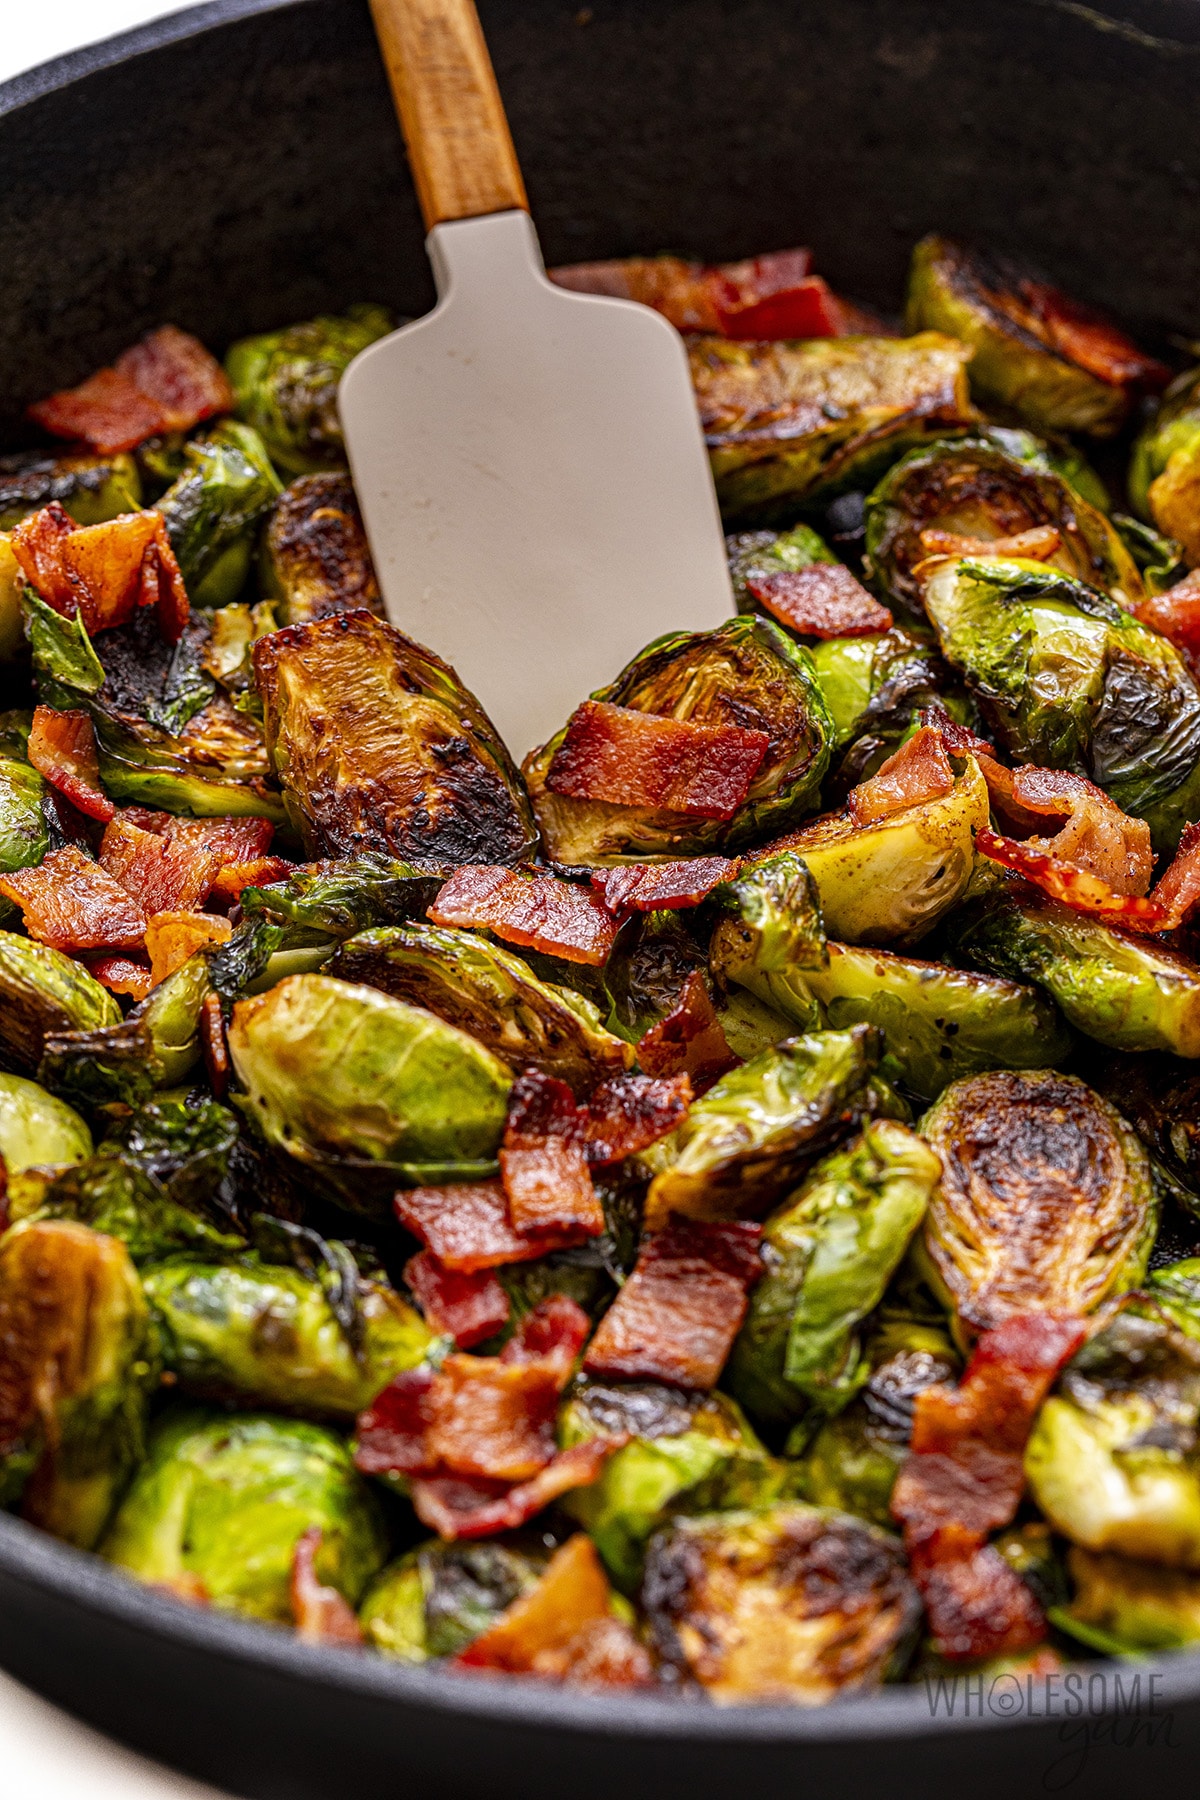 Sauté Brussels sprouts and bacon in skillet.